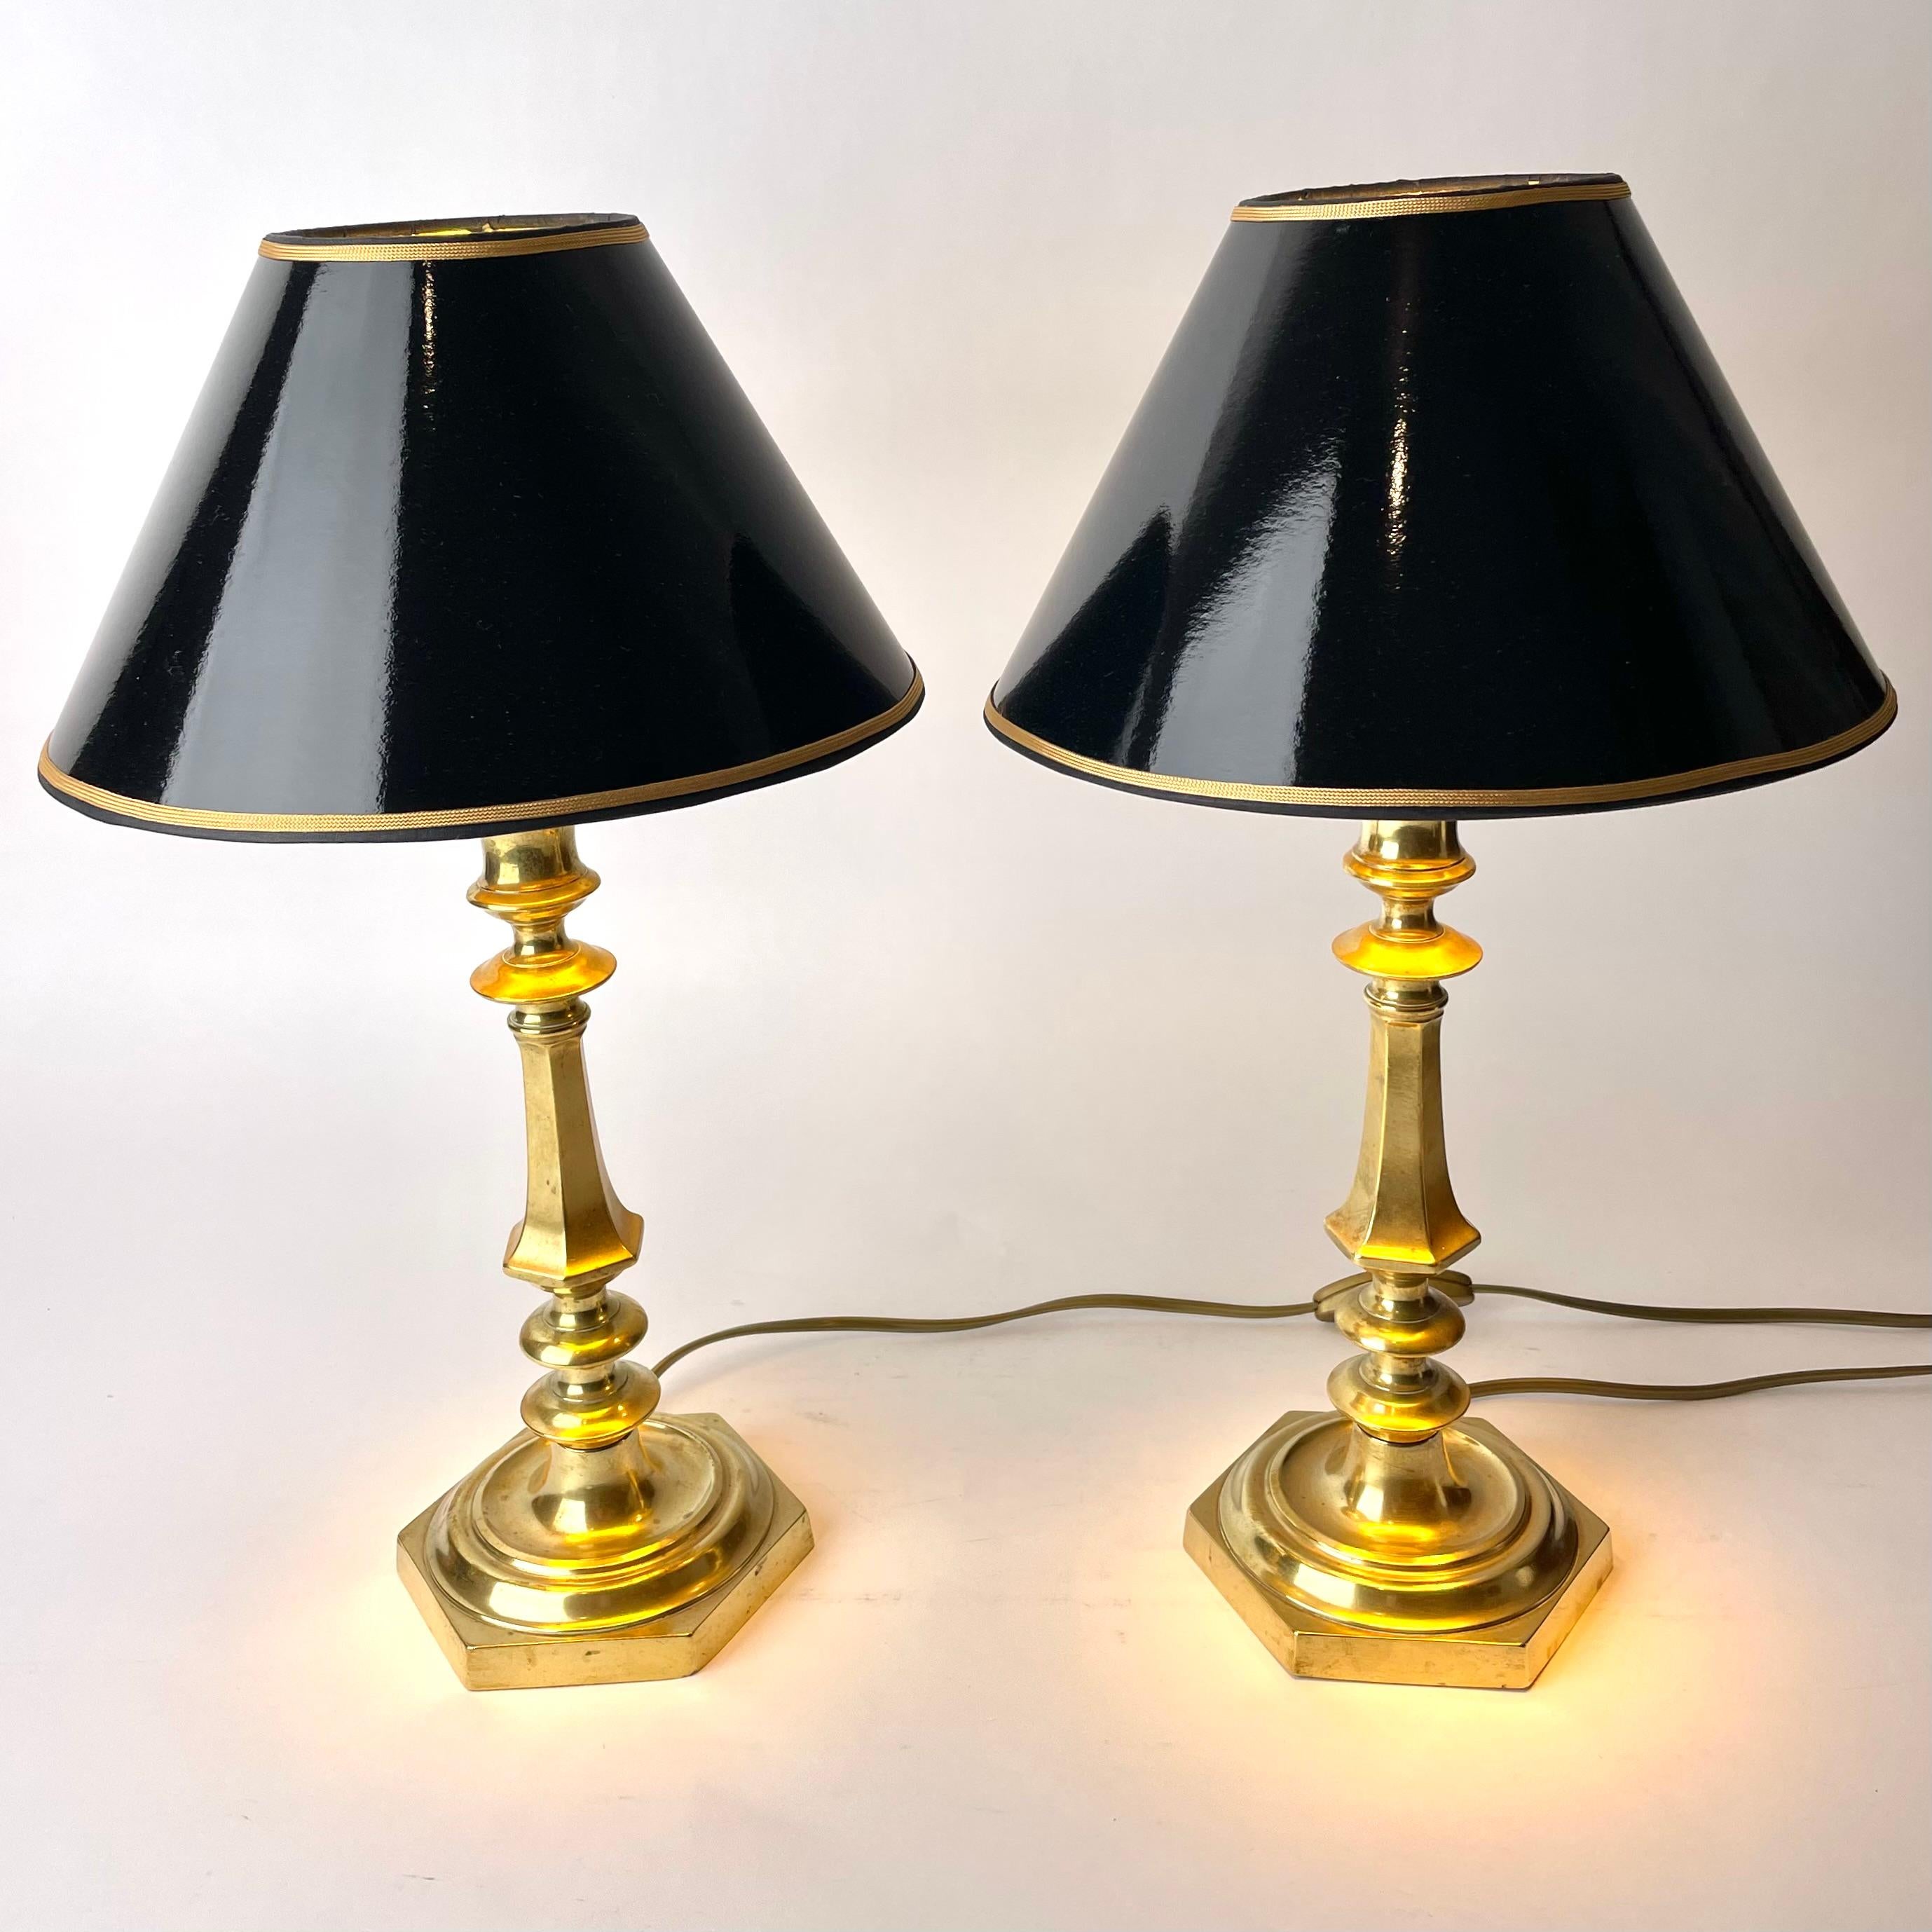 Elegant Pair of hexagonal Bronze Table Lamps from Mid-19th Century. Originally a pair of candlesticks converted to table lamps during early 20th Century.

Newly rewired electricity 

 New lampshades in black lacquer with gilding on the inside to